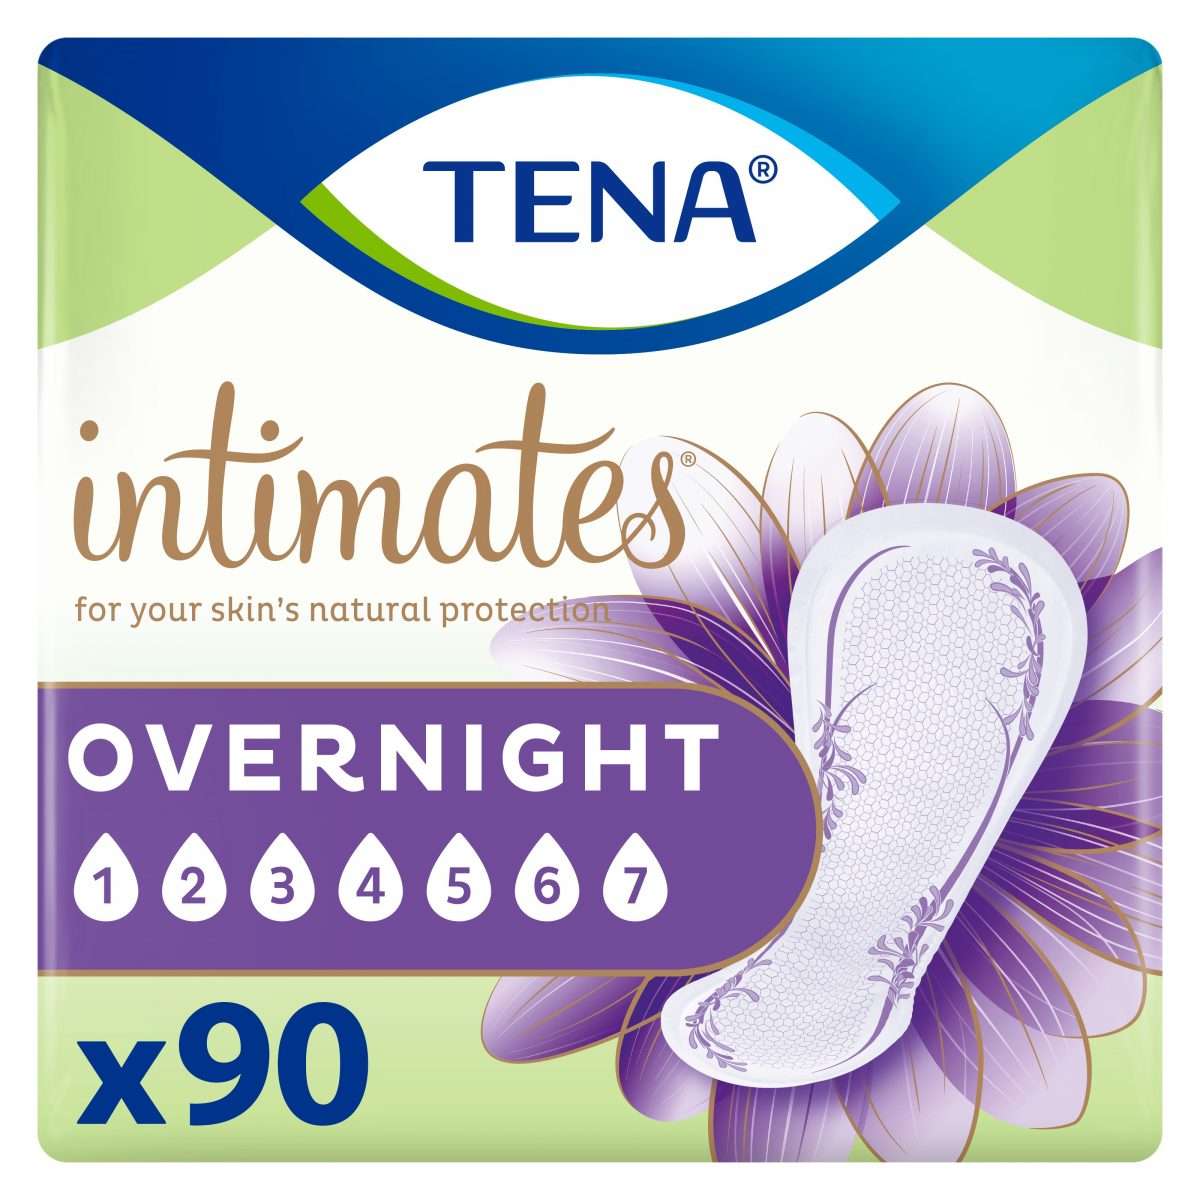 Tena Intimates Overnight Absorbency Incontinence/Bladder Control Pad ...